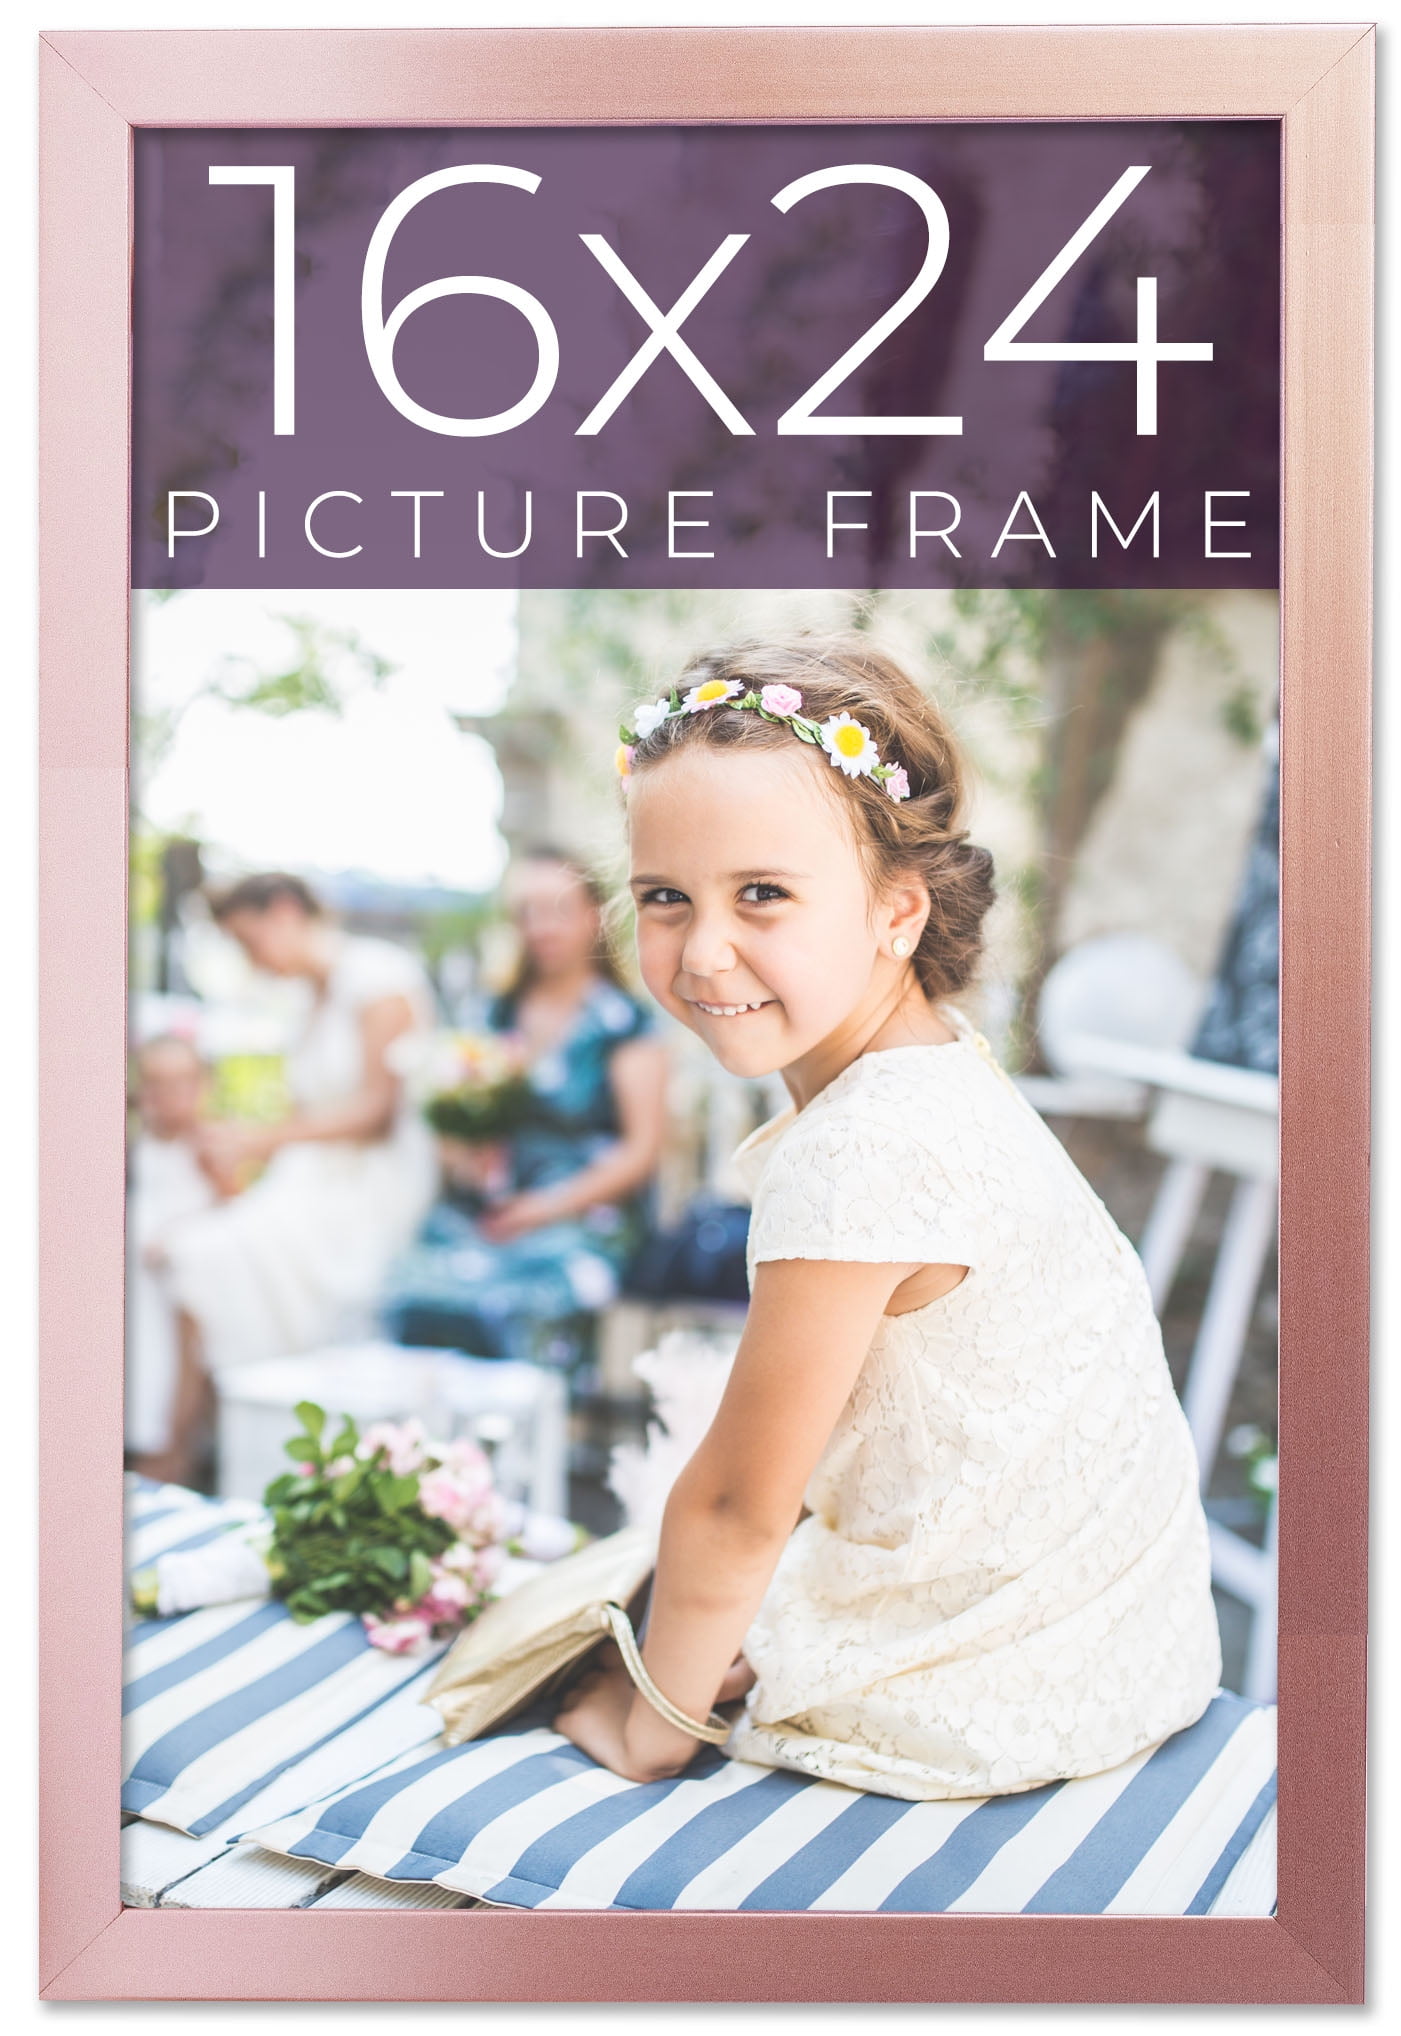 16x24 Frame Pink Real Wood Picture Frame Width 0.75 inches | Interior Frame  Depth 0.5 inches | Rose